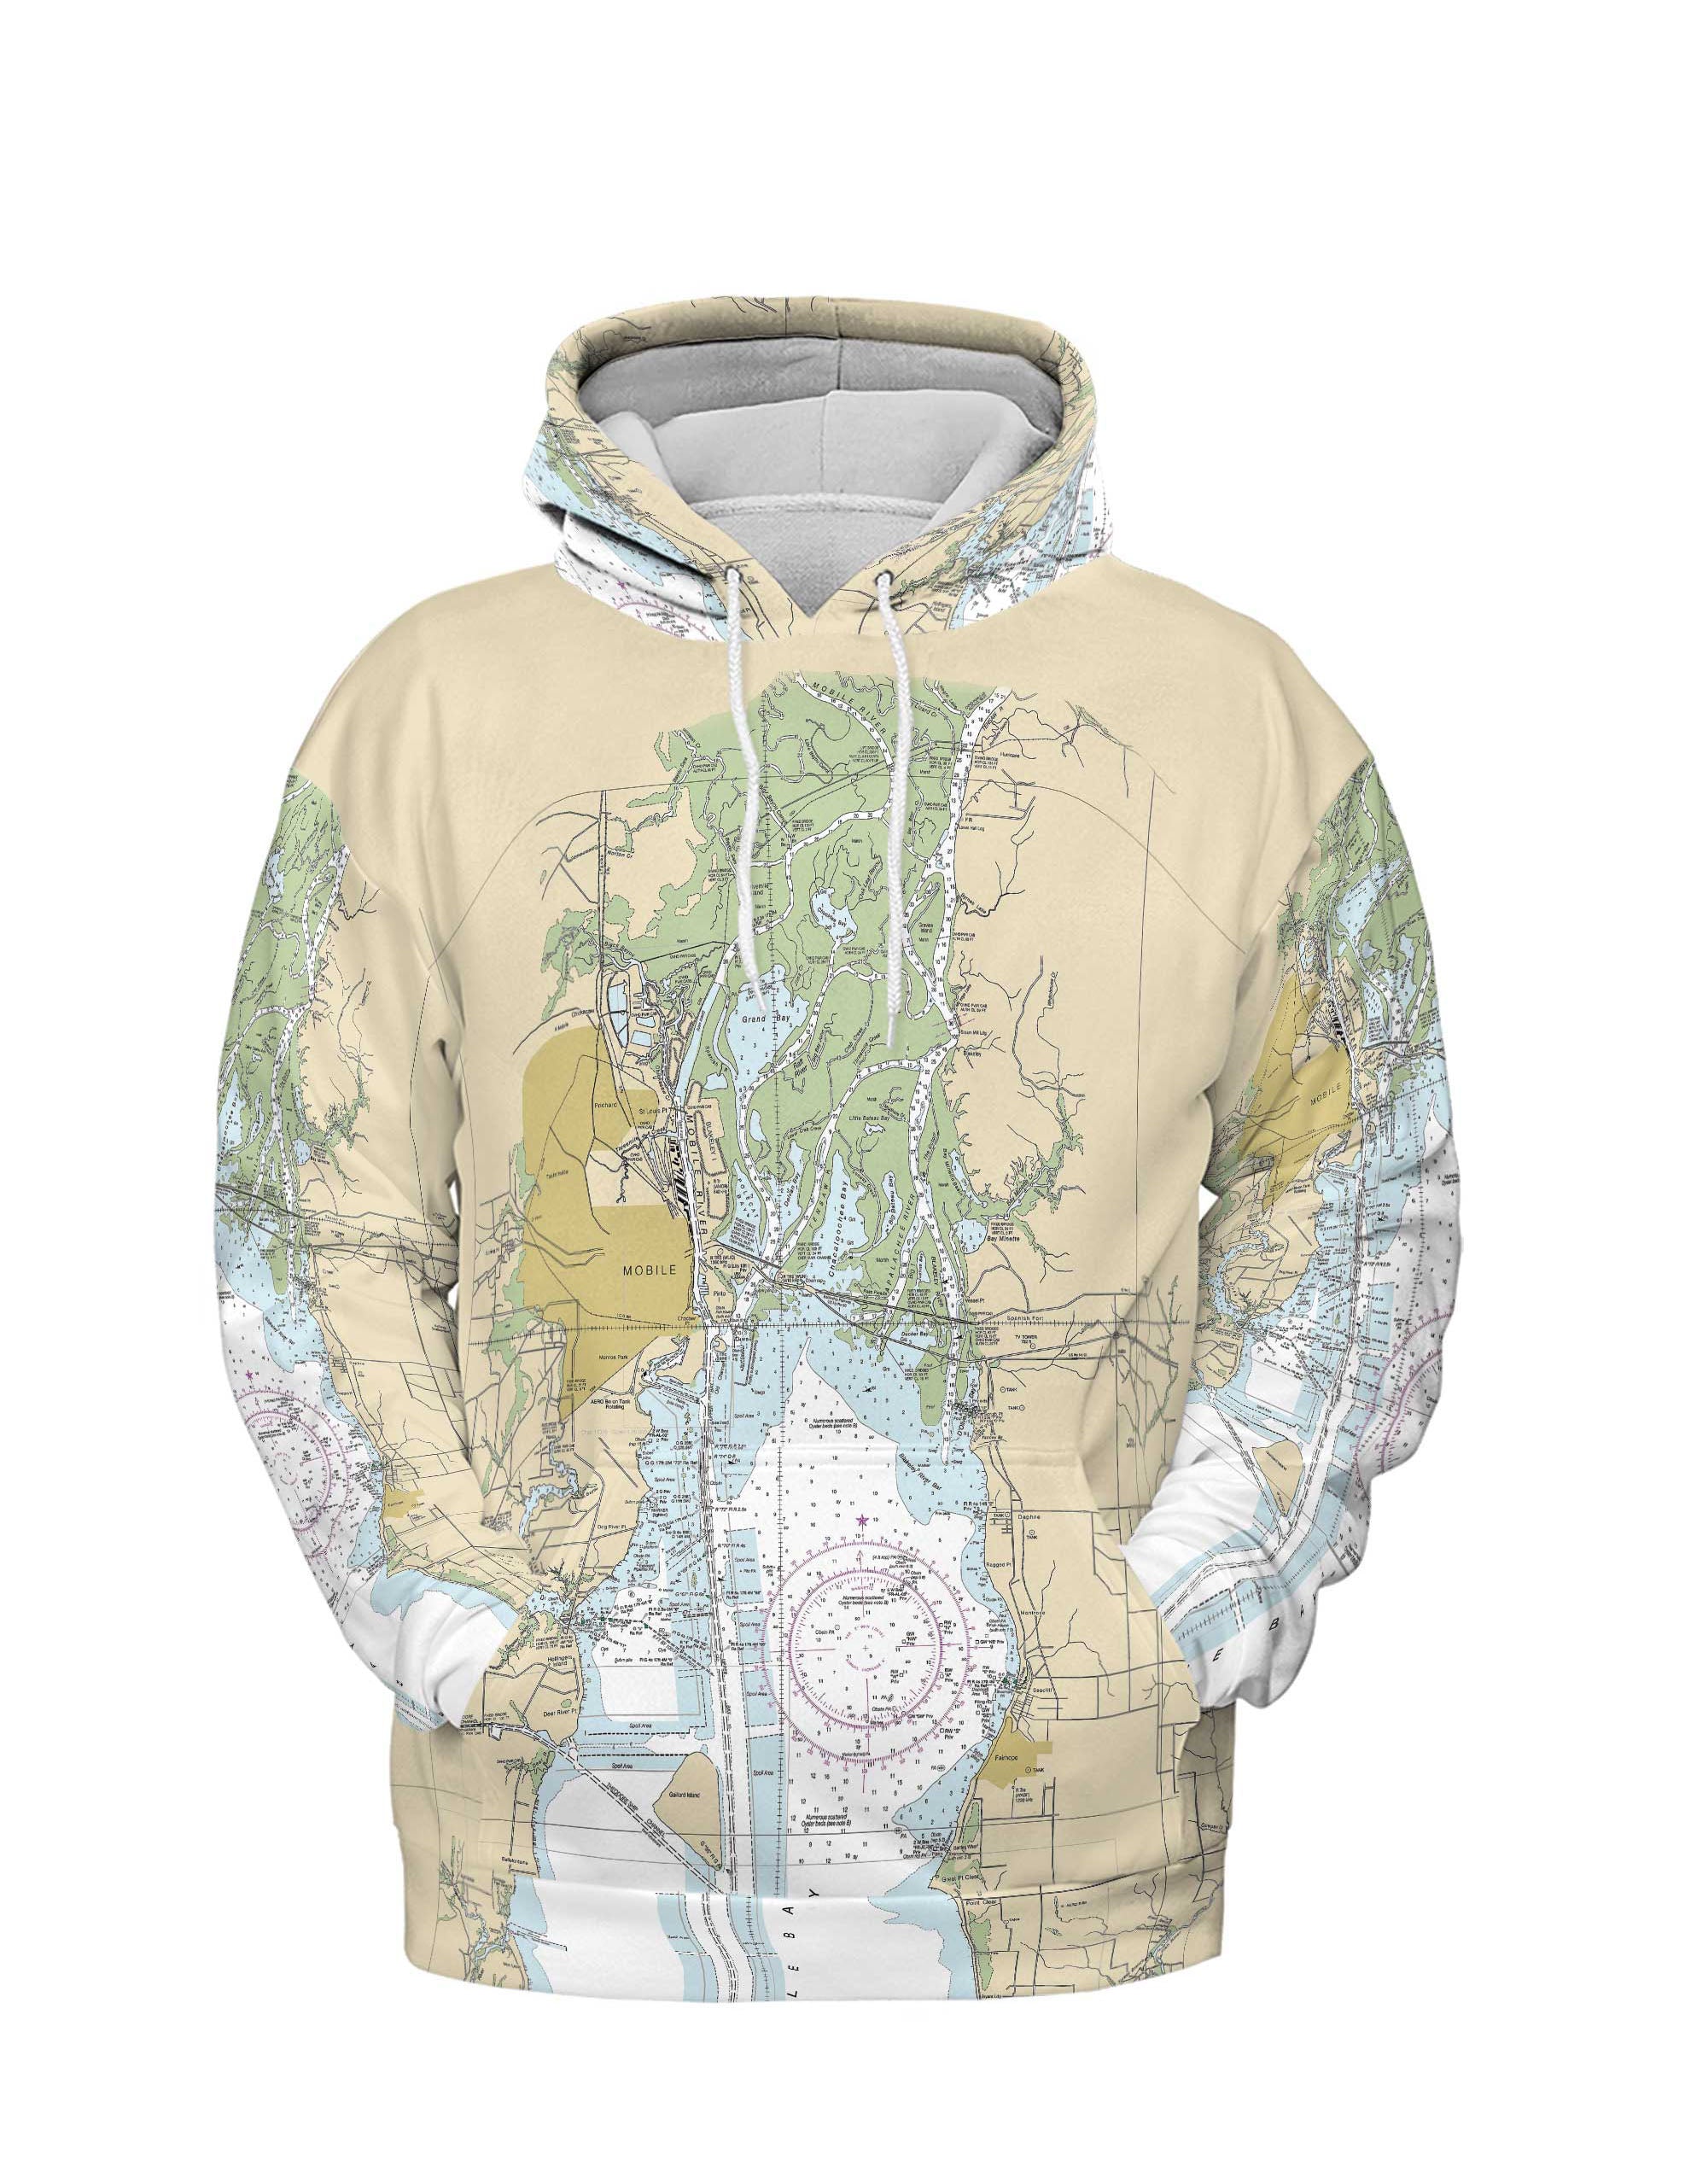 The Mobile Bay Lightweight Hoodie